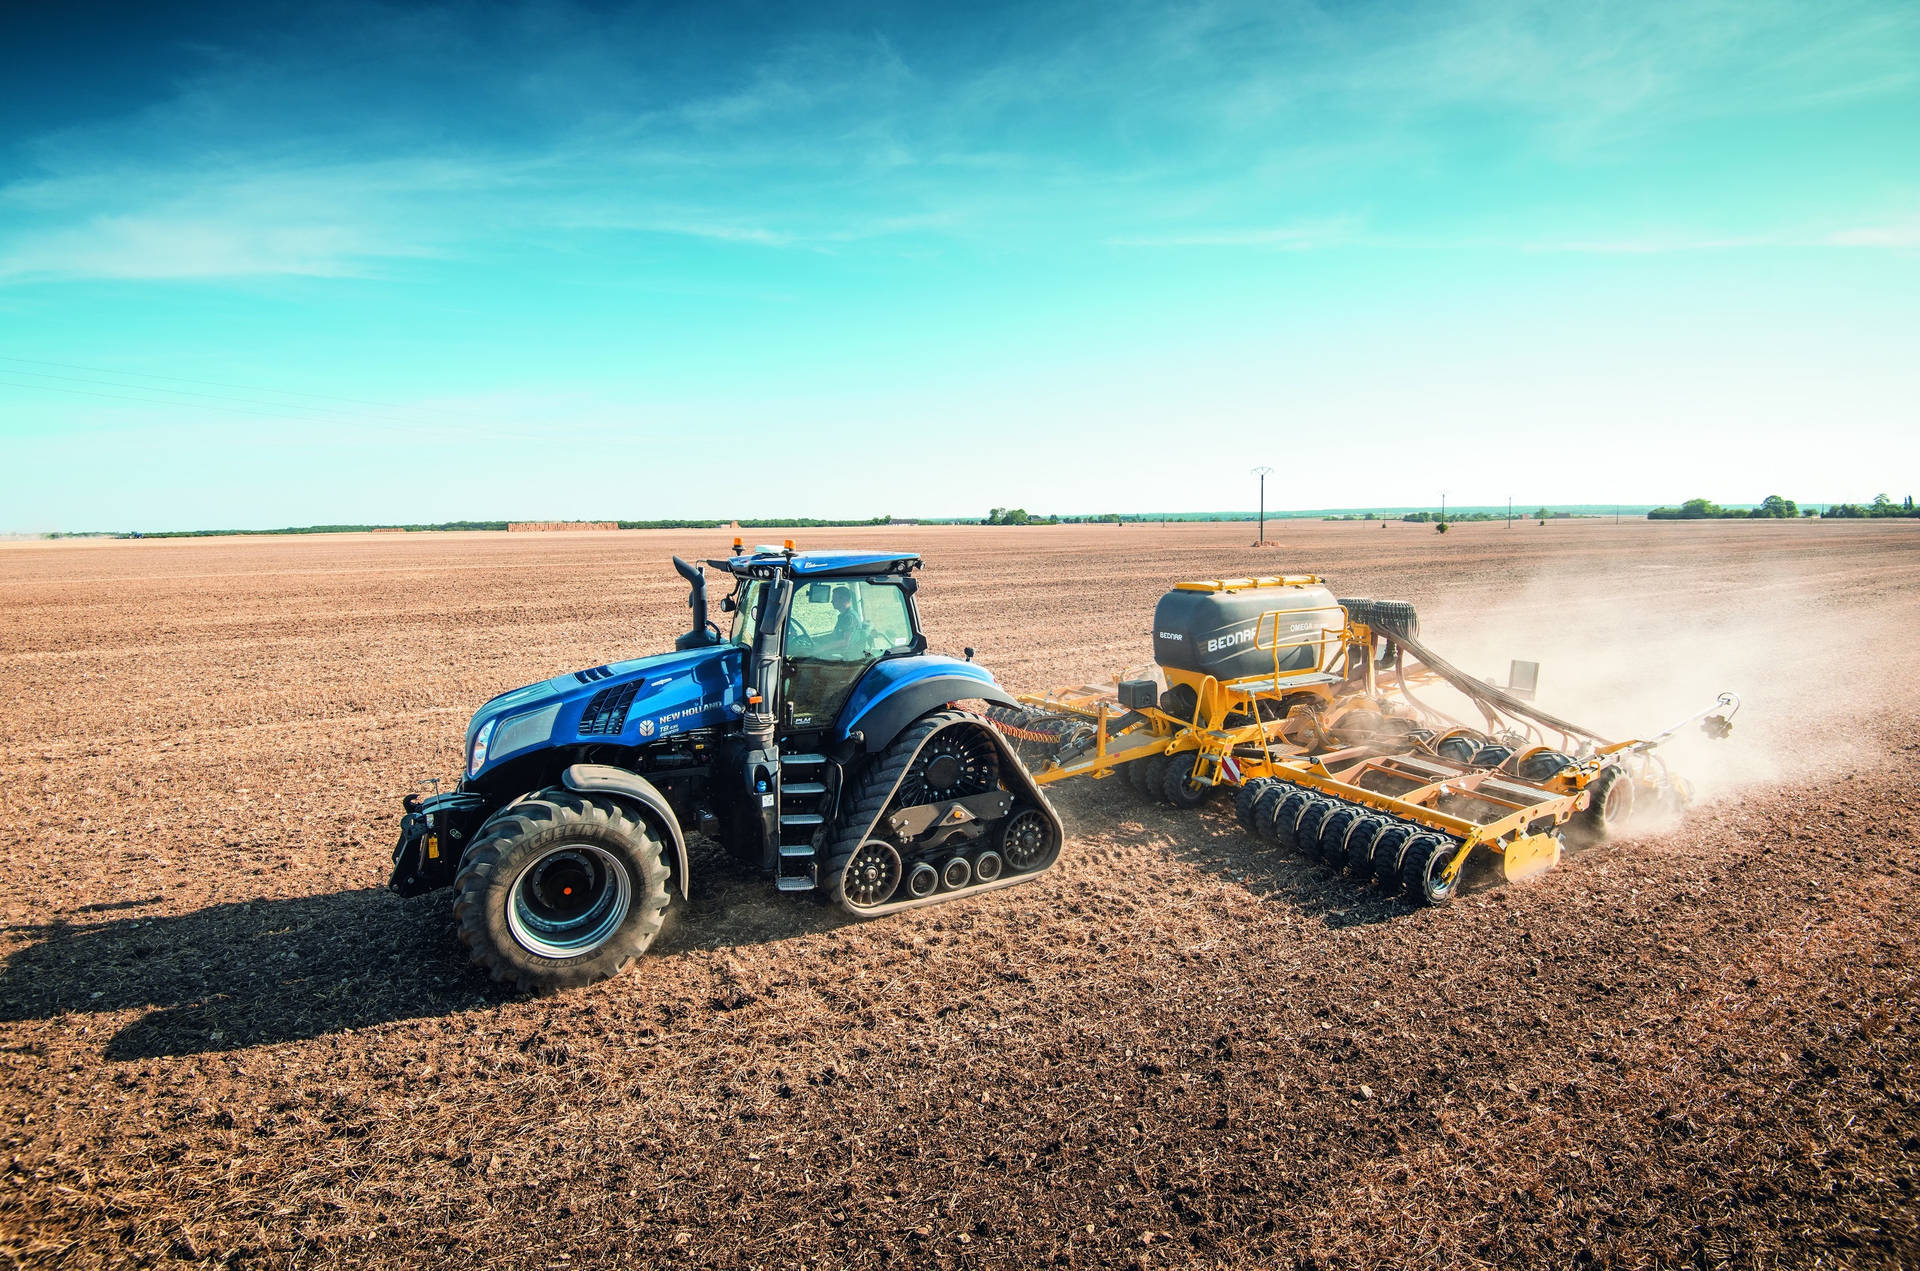 Caption: Majestic Blue New Holland Tractor in the Countryside Wallpaper